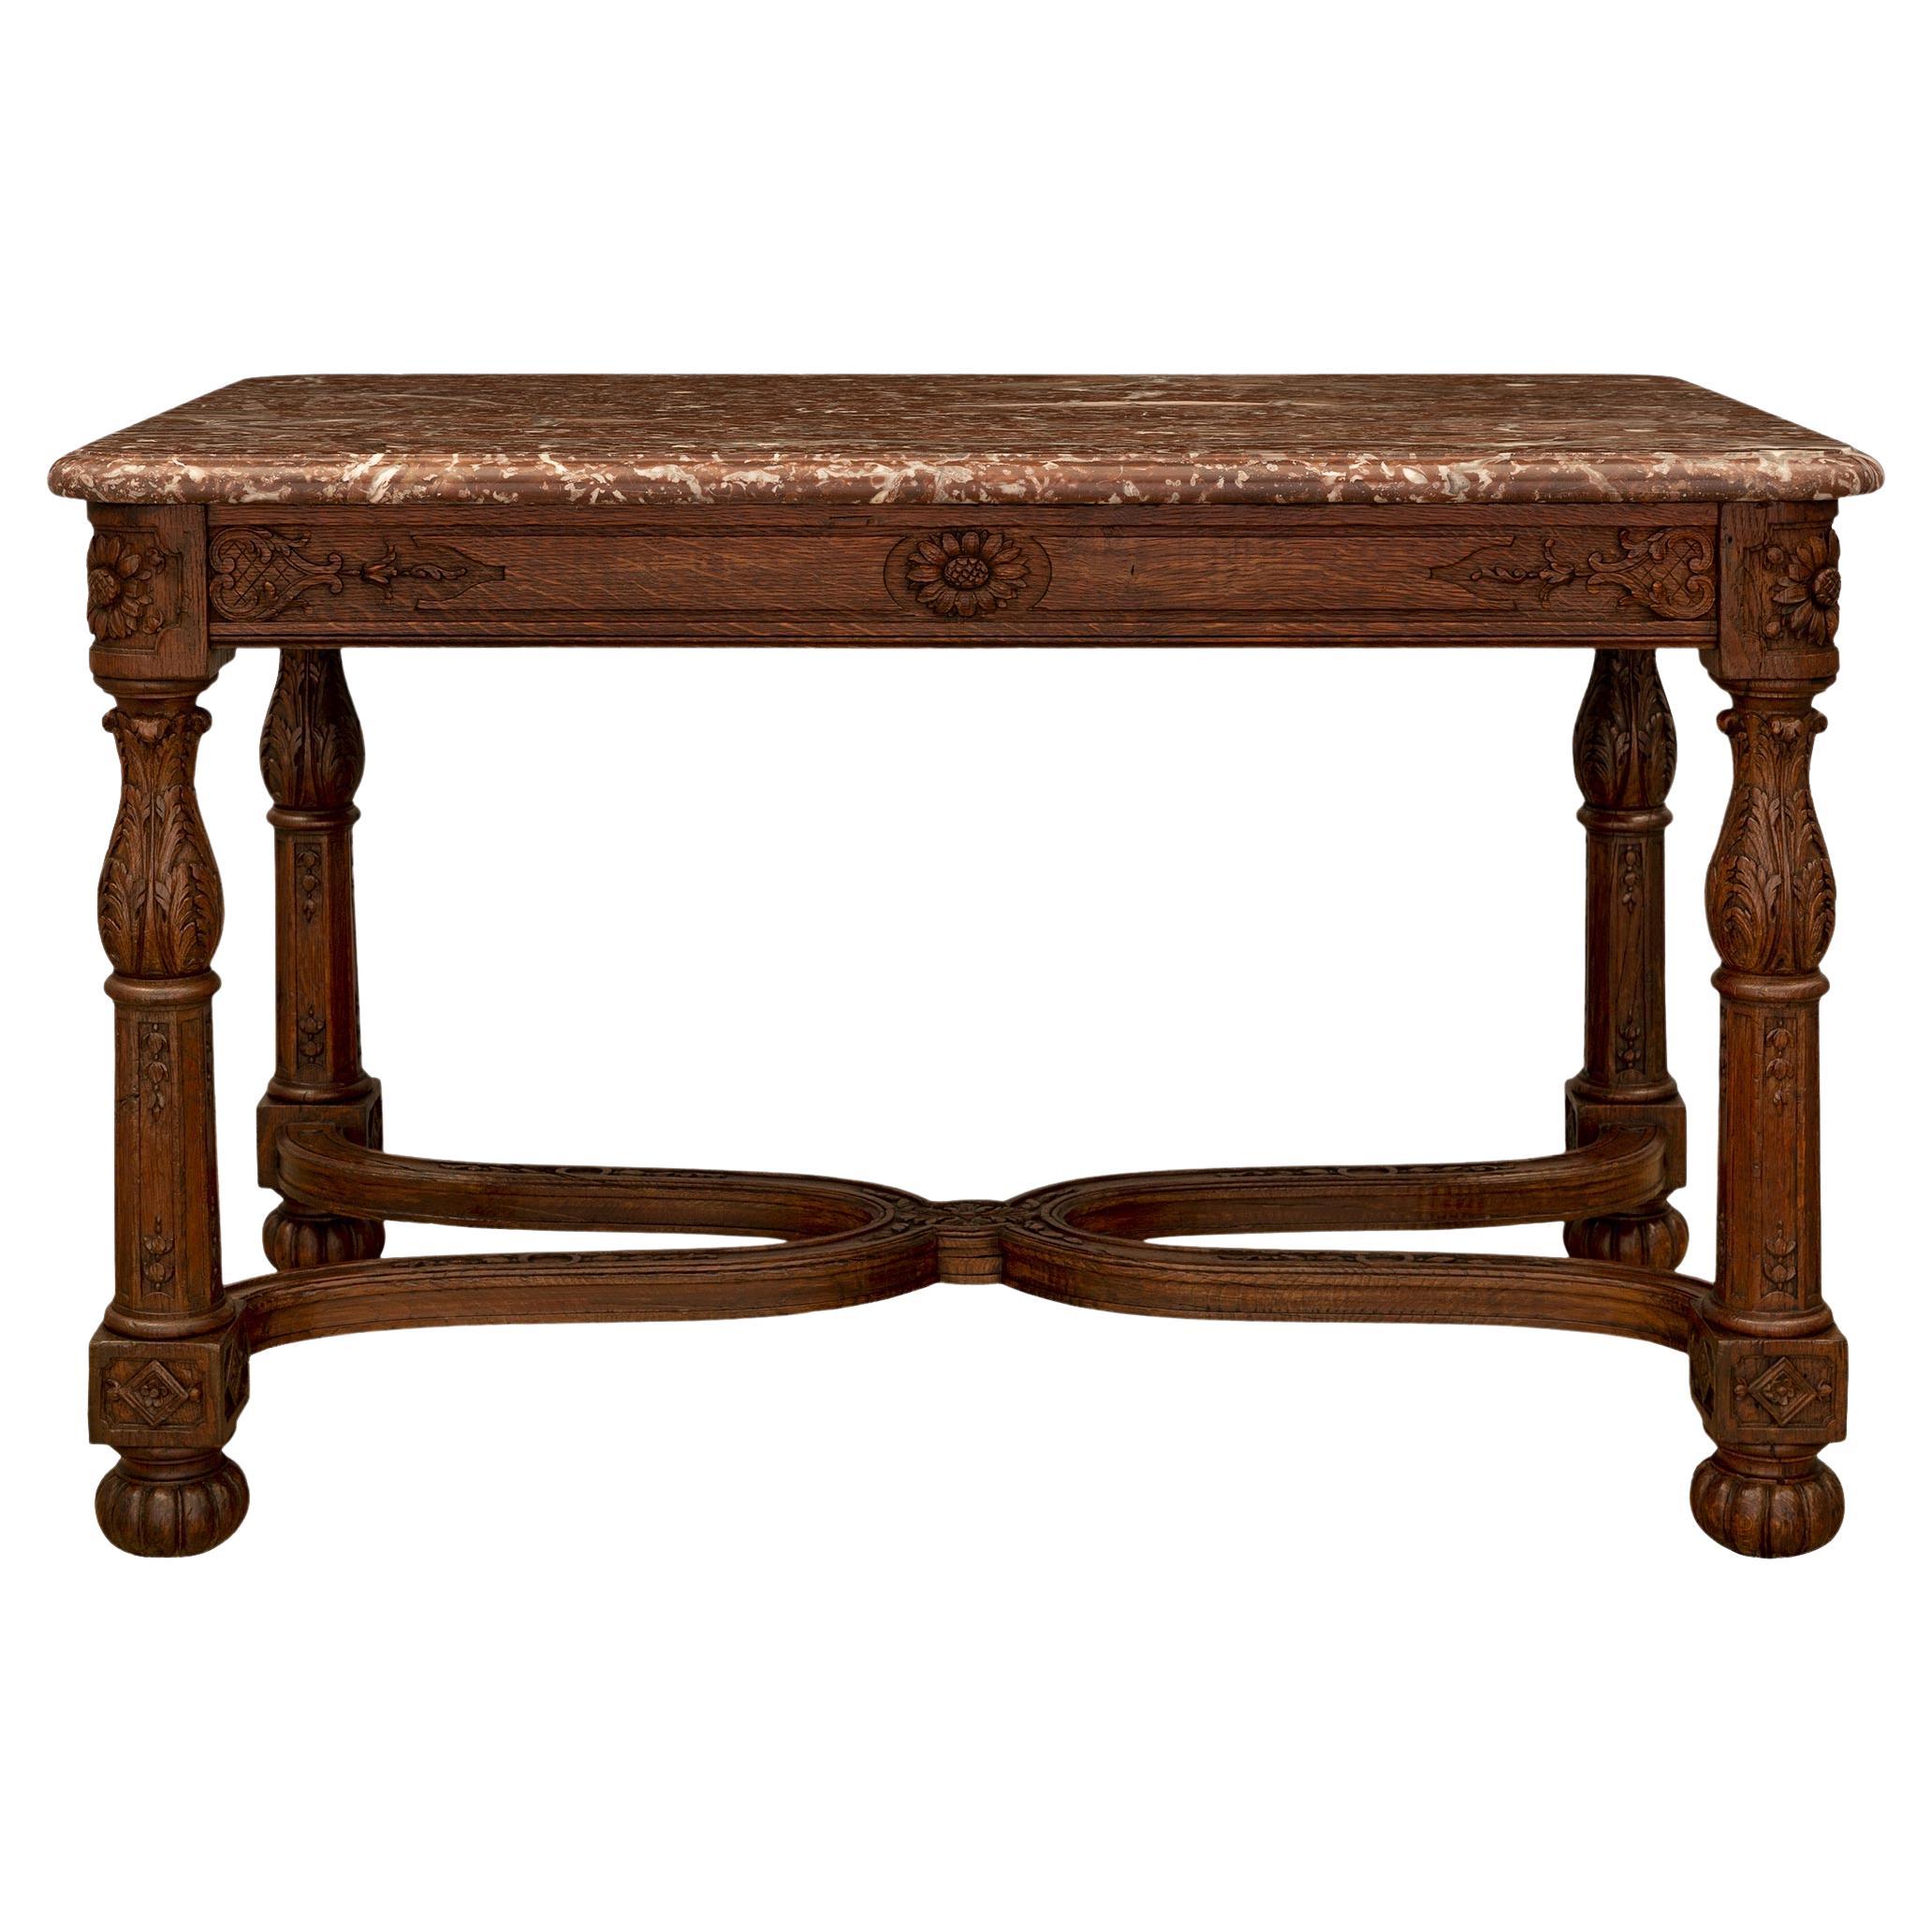 French 18th Century Louis XVI Period Country French Provençal Oak Center Table For Sale